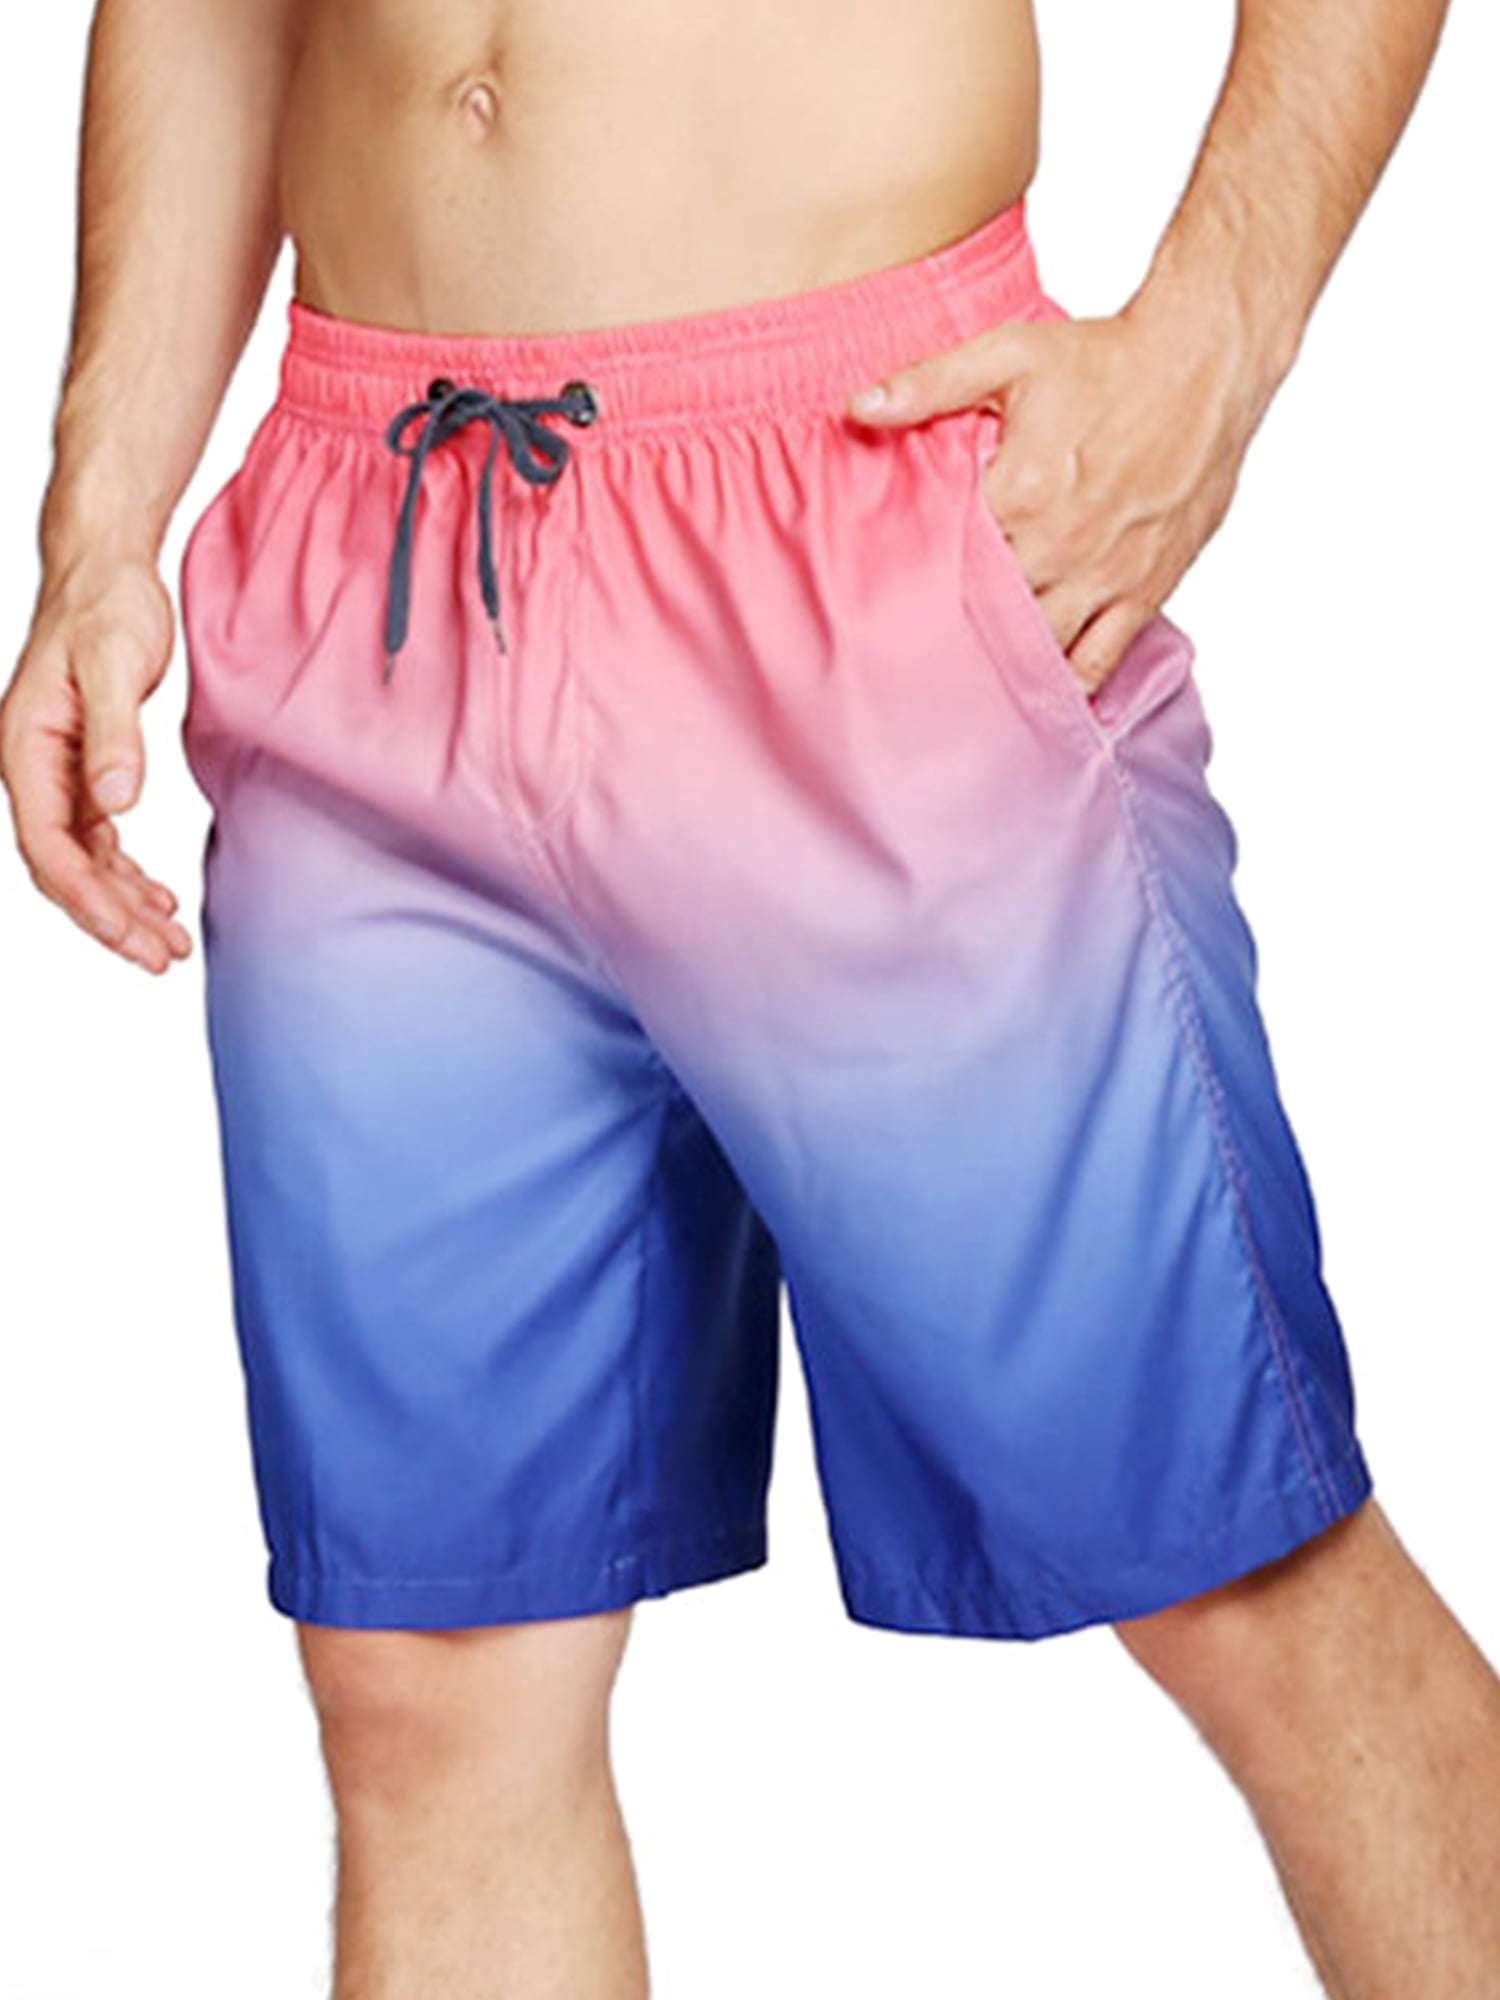 Funny Characters Elastic Waisted Drawstring Baggy Shorts Beach Summer Activewear Casual Pants L-3XL Mens Swim Trunks